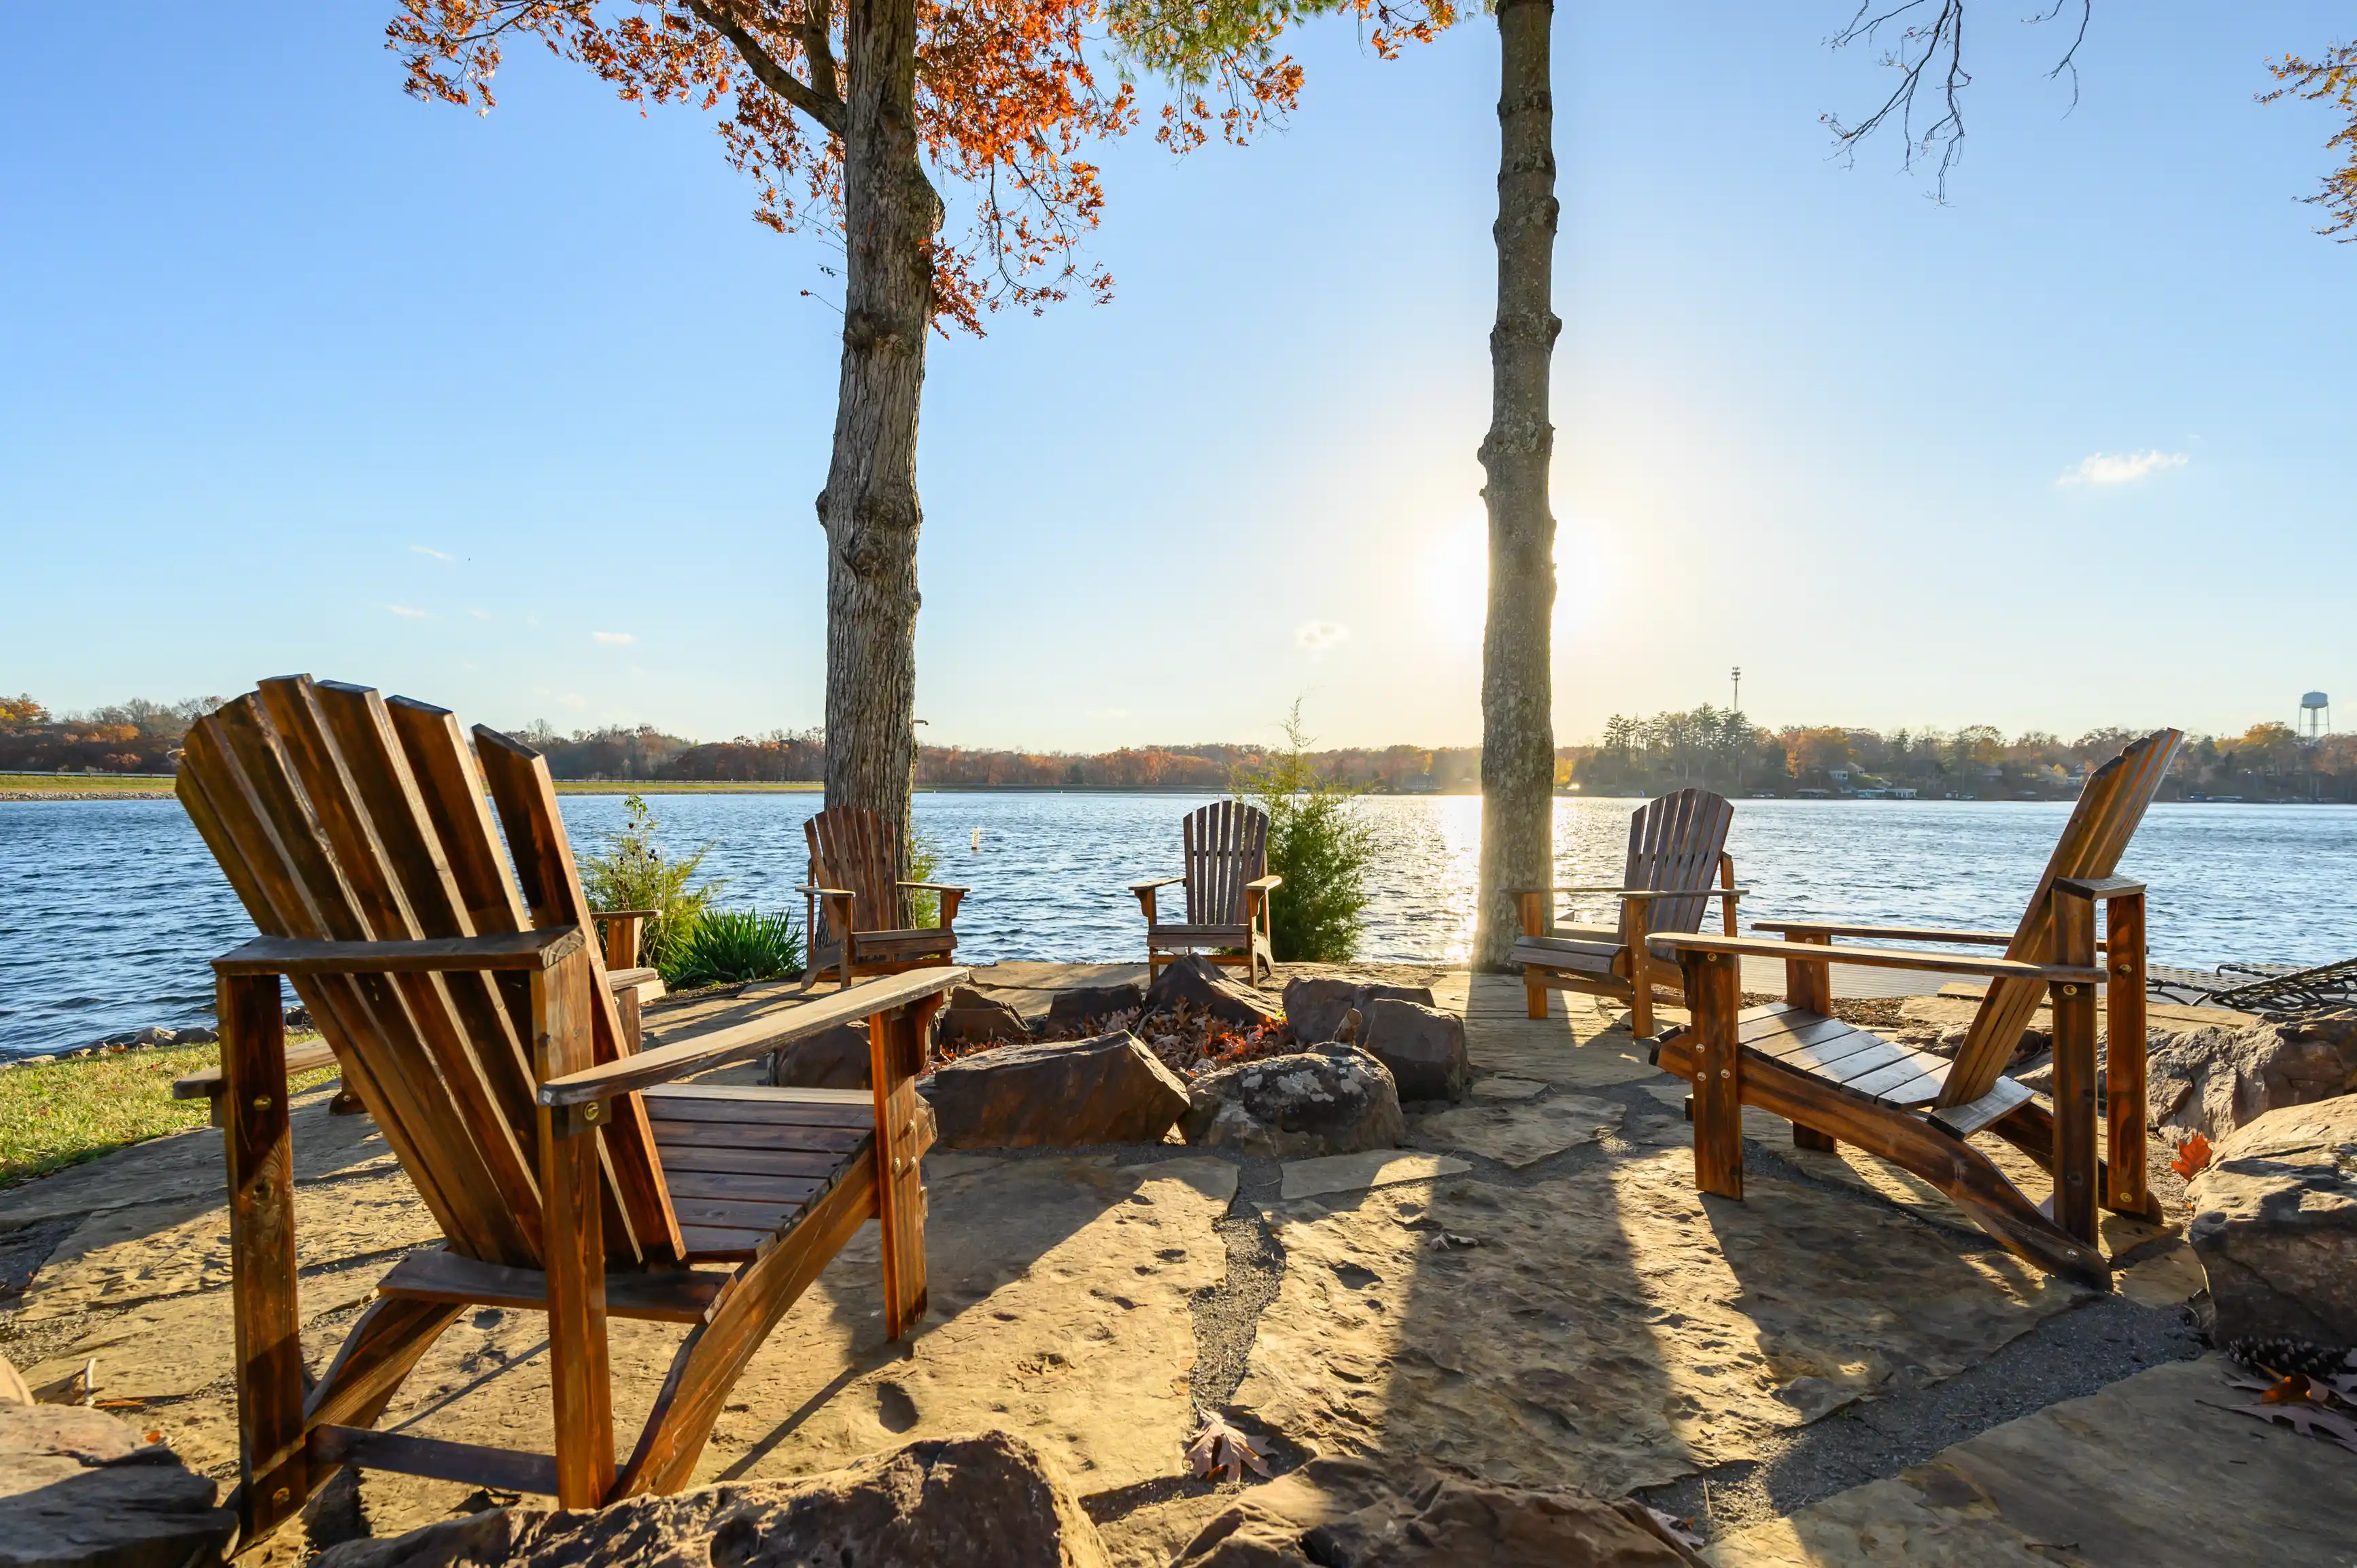 Two wooden Adirondack chairs facing a tranquil lake with a sunset in the background, surrounded by trees with autumn leaves.